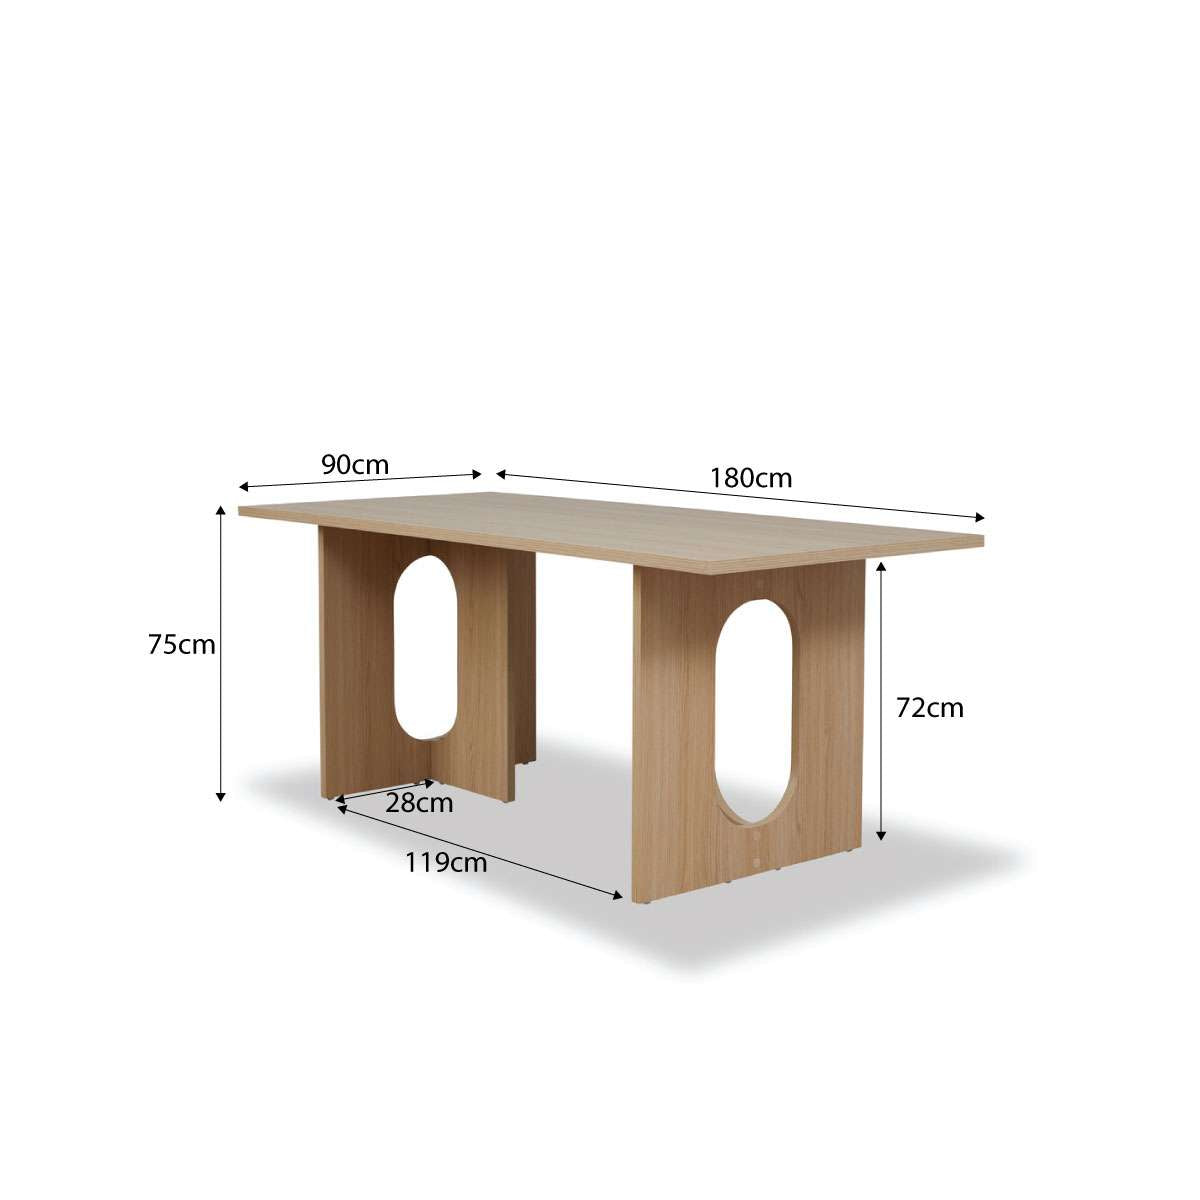 Ora Six Seater Rectangle Dining Table